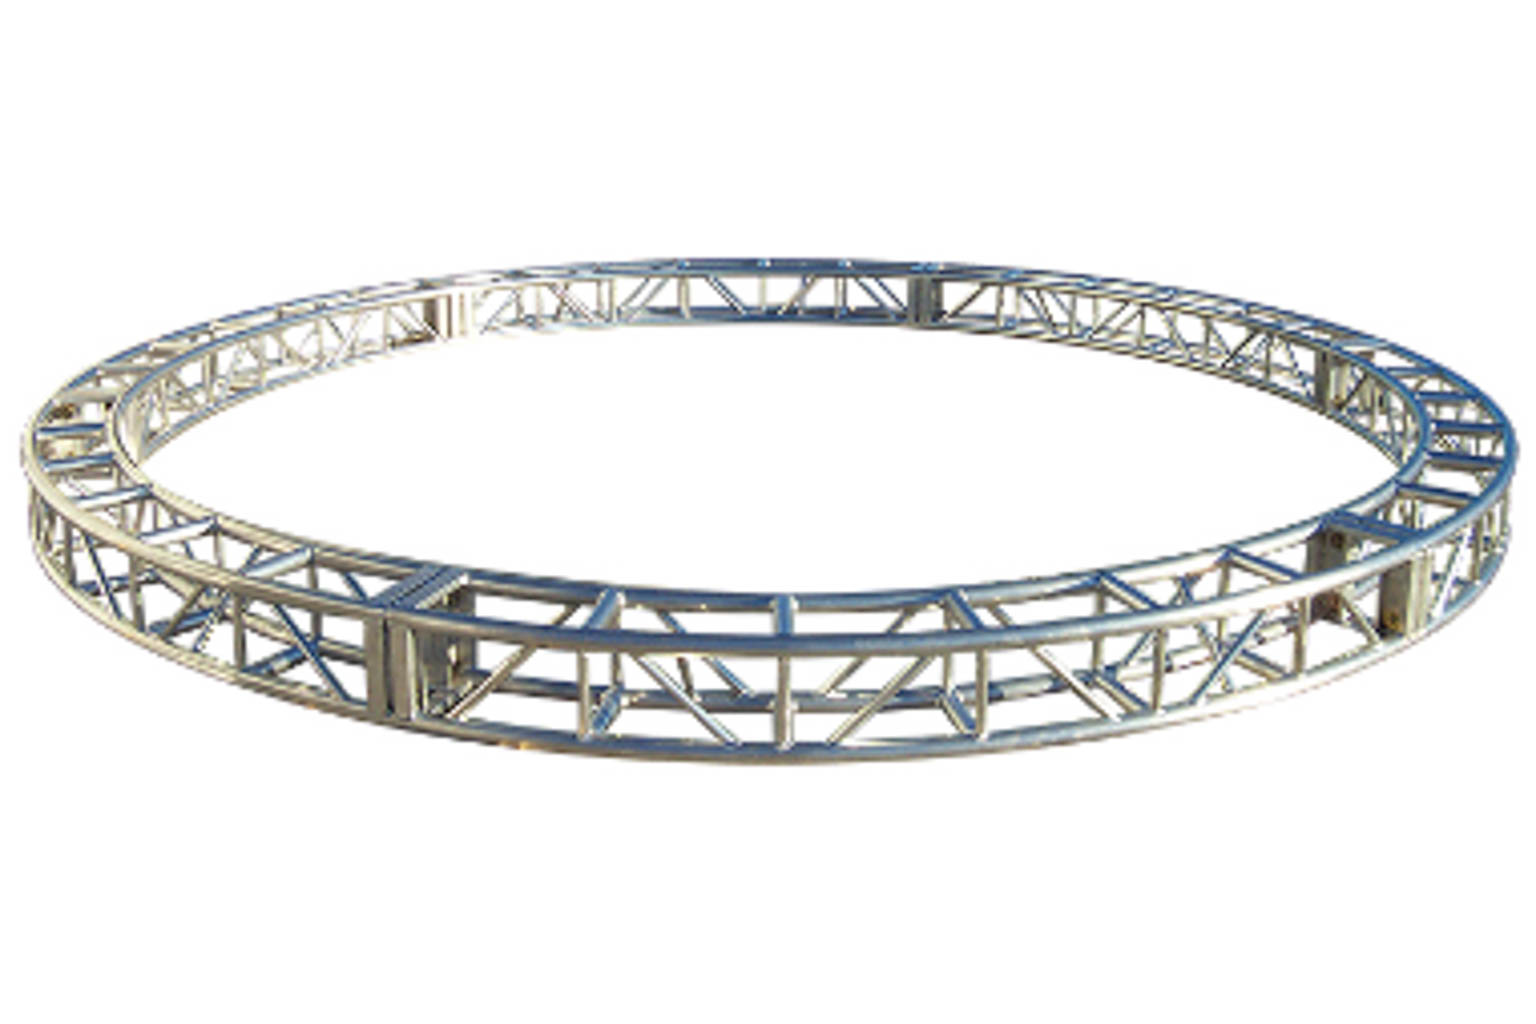 Picture of circular truss.